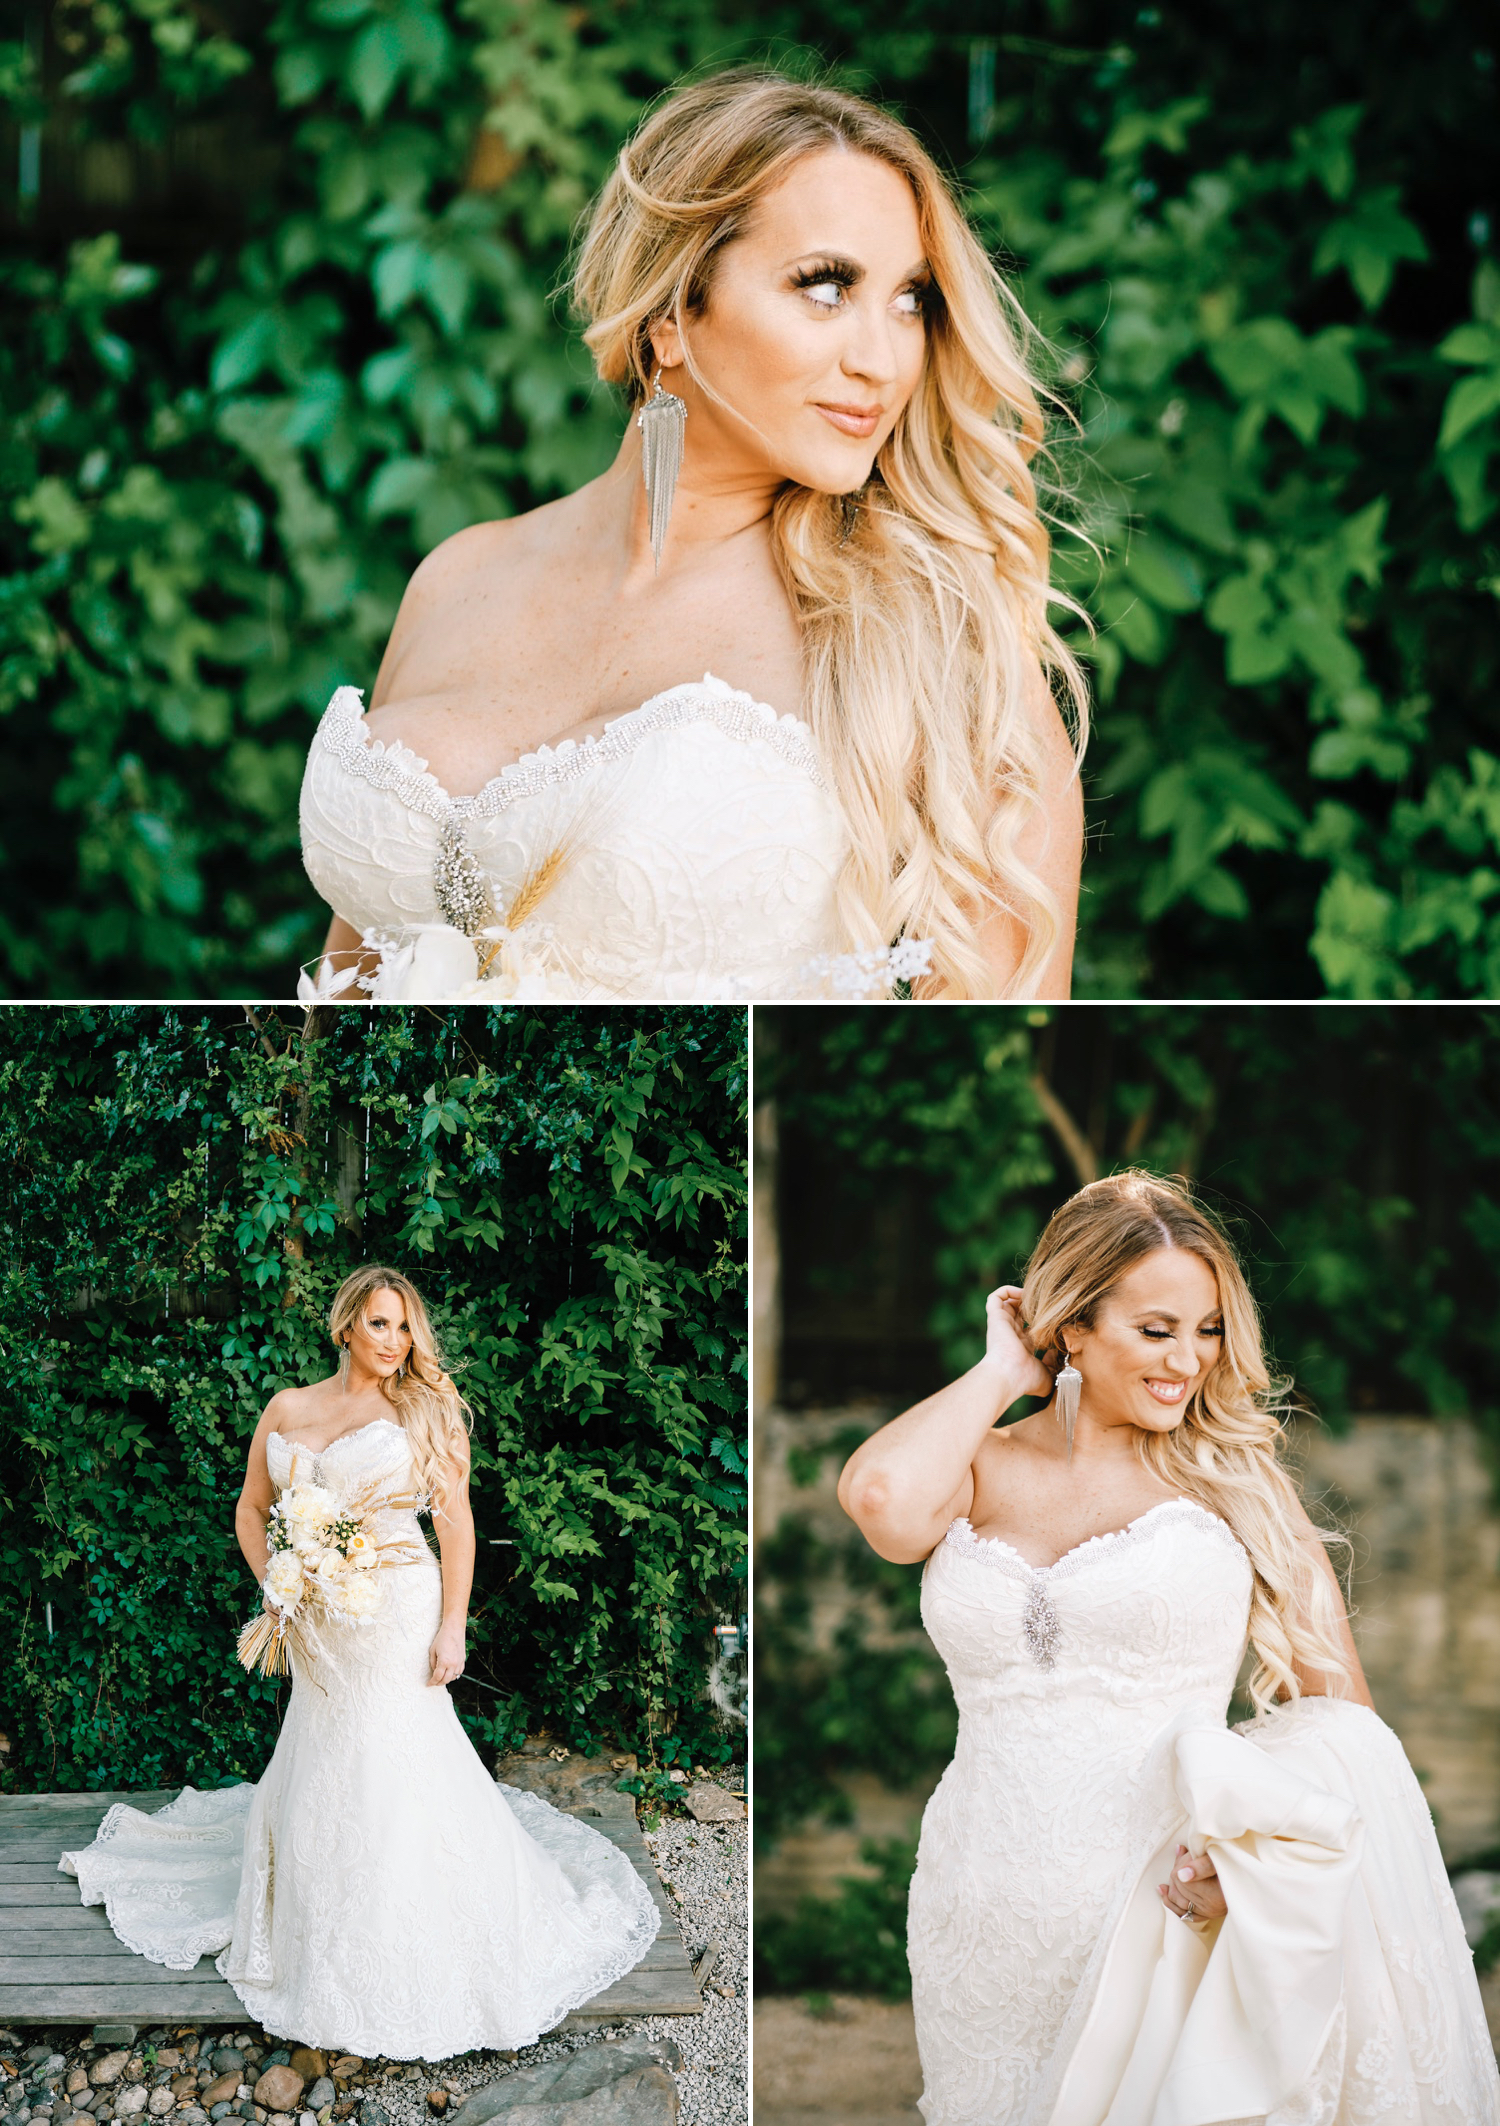 Whitney and her gorgeous dress in front of the ivy wall at Gruene Estate by Austin wedding photographer Mercedes Morgan Photography